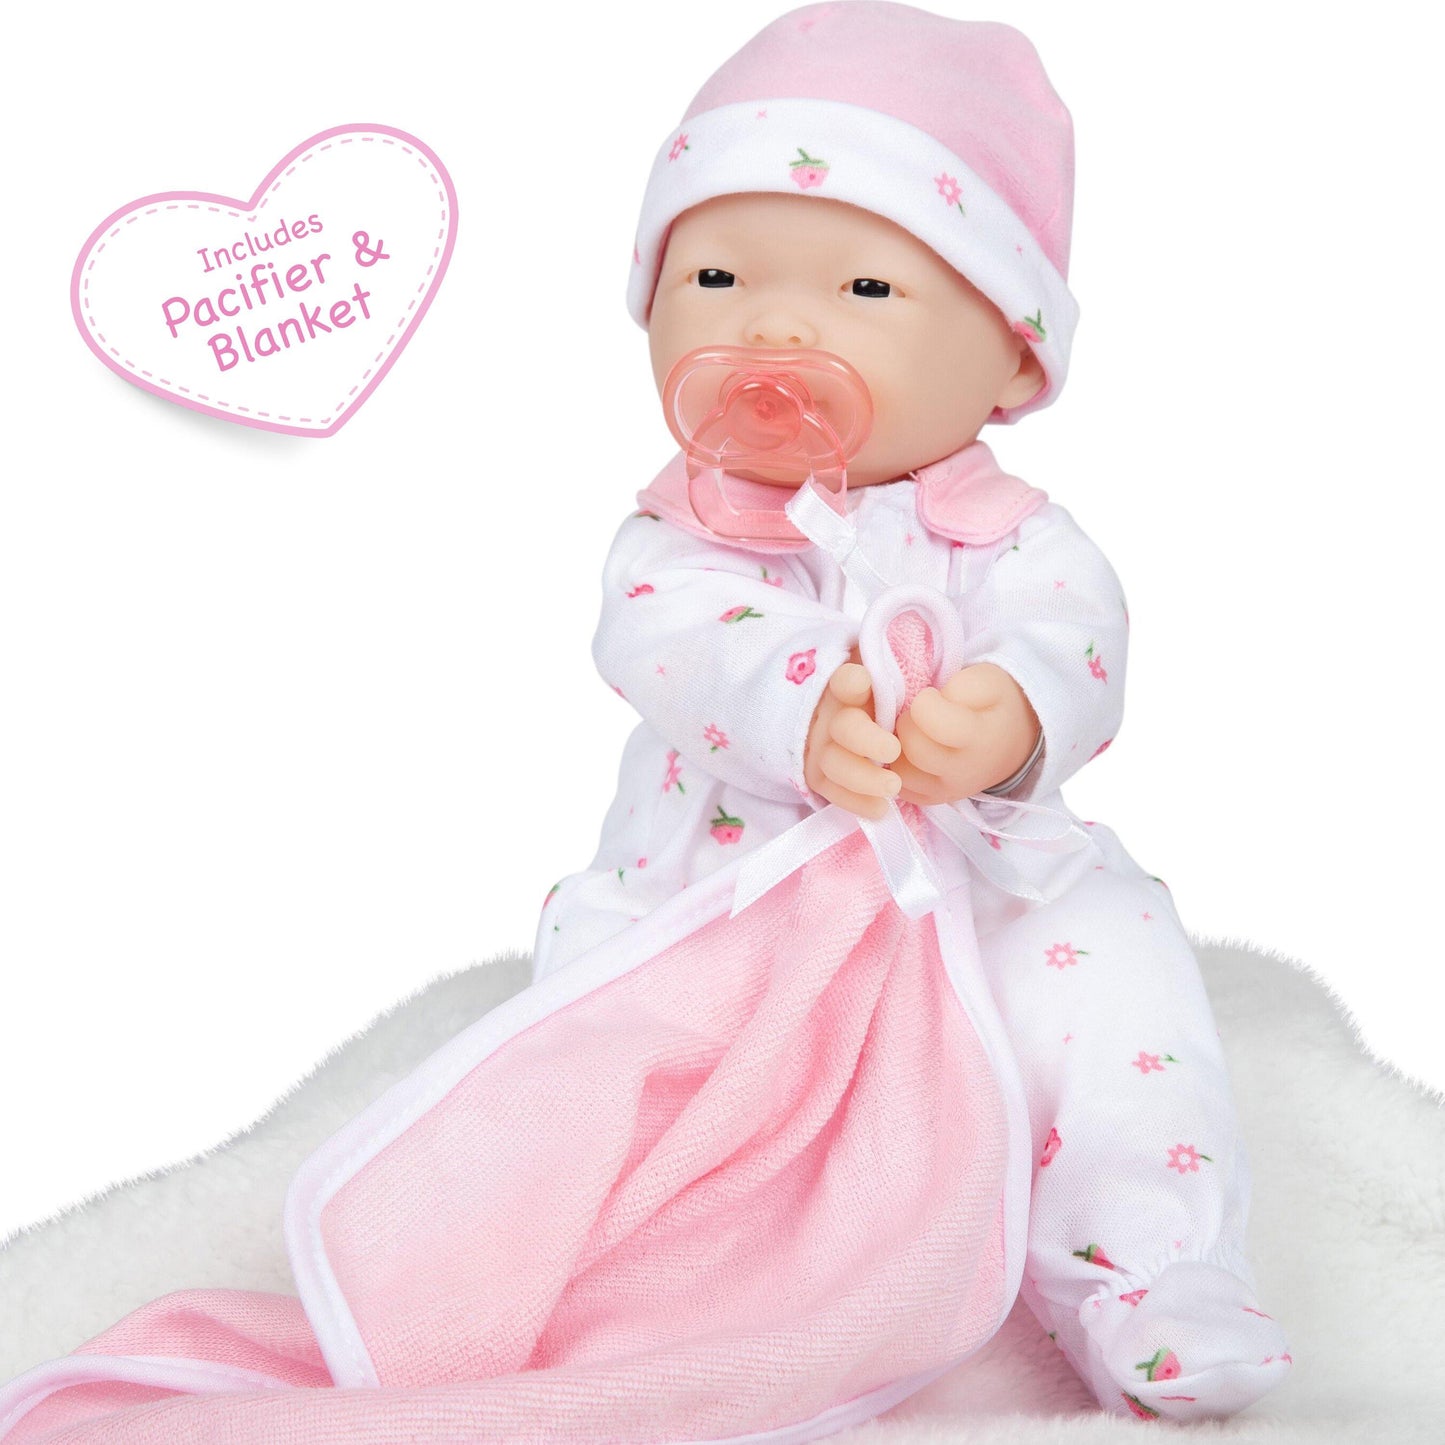 JC Toys, La Baby 11 inch Soft Body Asian Baby Doll in Pink Outfit - JC Toys Group Inc.